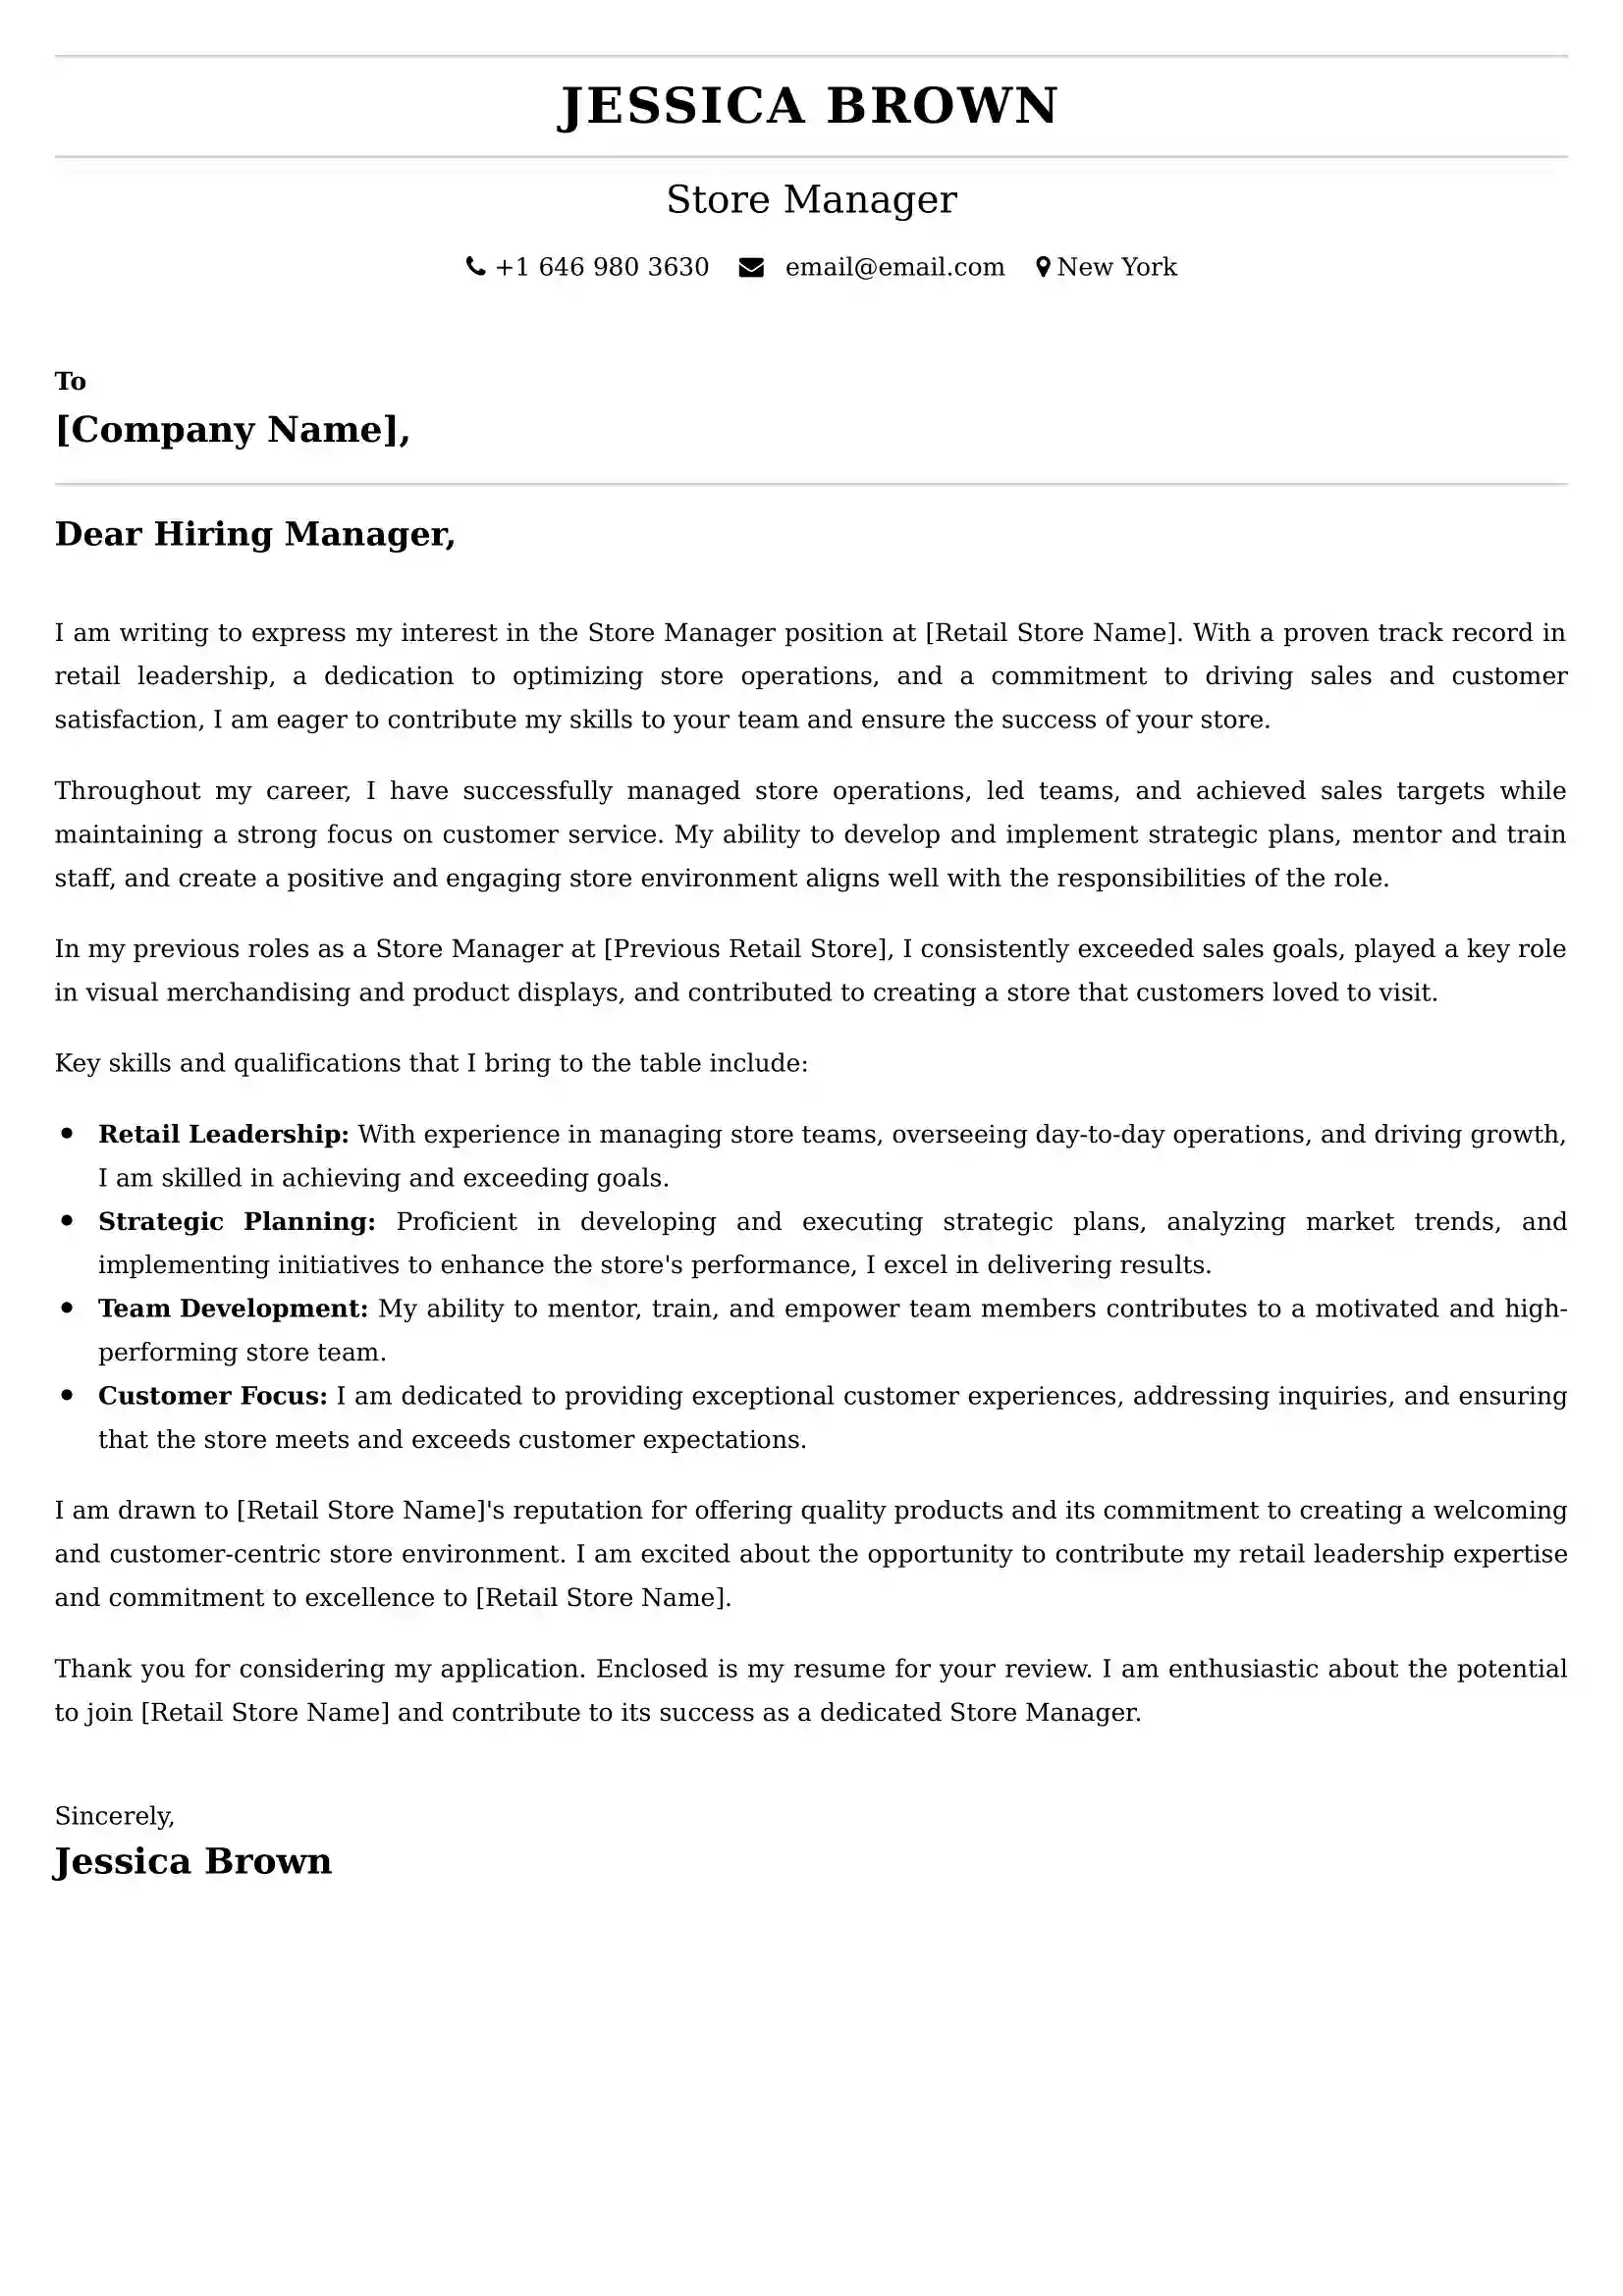 Store Manager Cover letter Sample